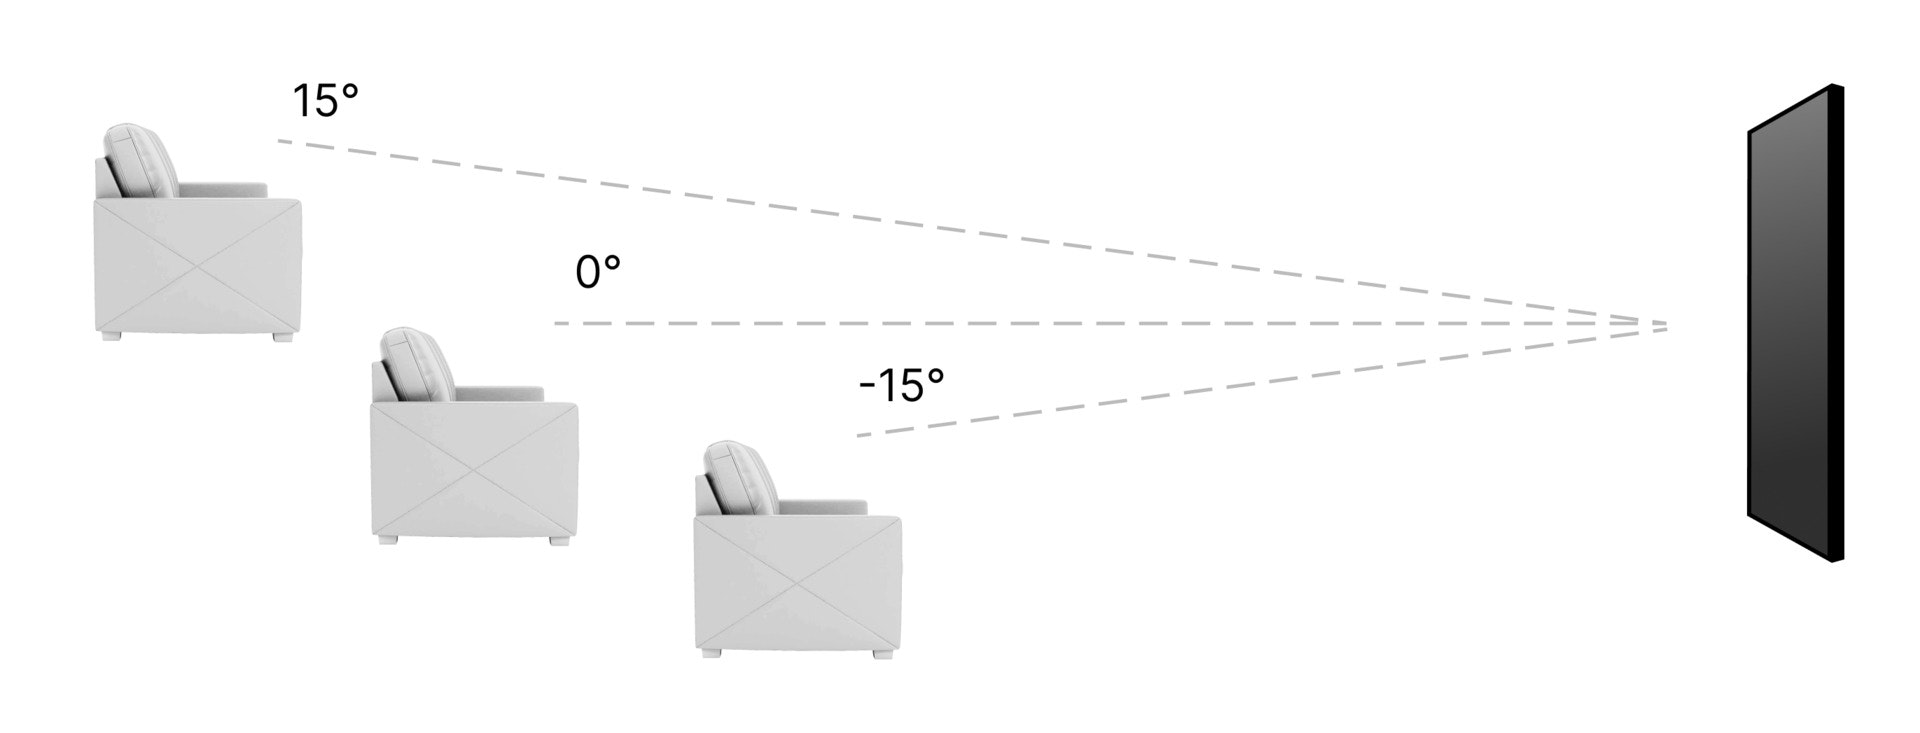 Correct vertical viewing angles, for the TV, according to THX recommendations